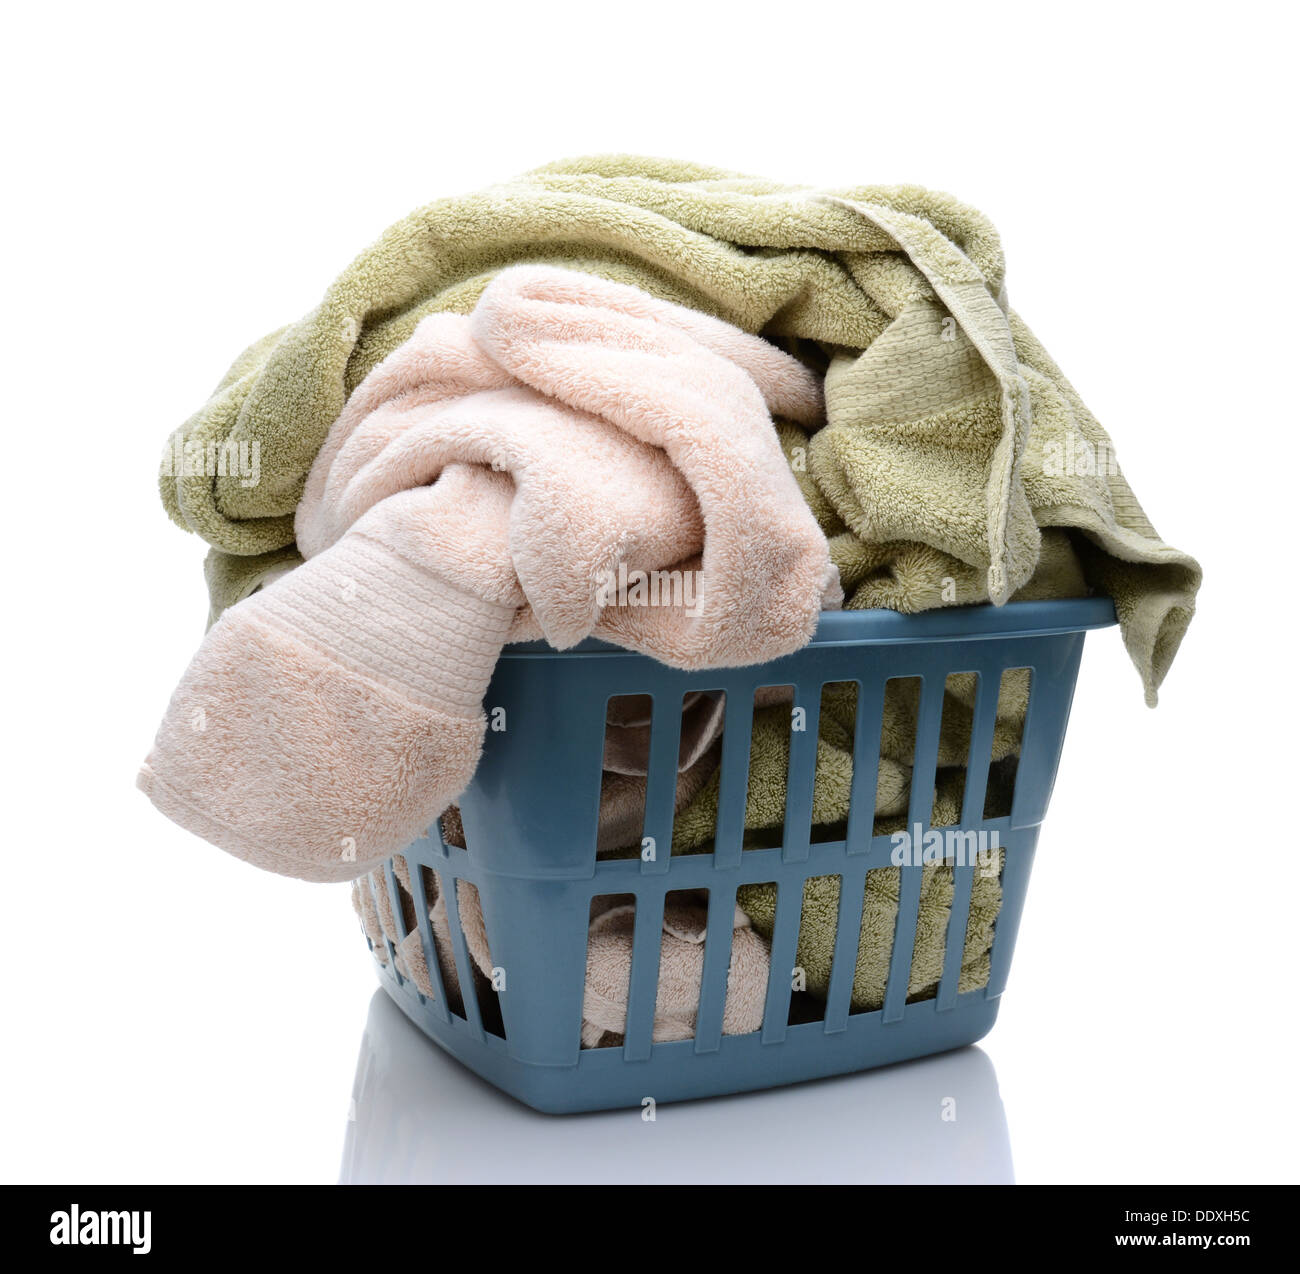 Closeup of a laundry basket full of towels. The over stuffed plastic basket is isolated on a white background with reflection. Stock Photo